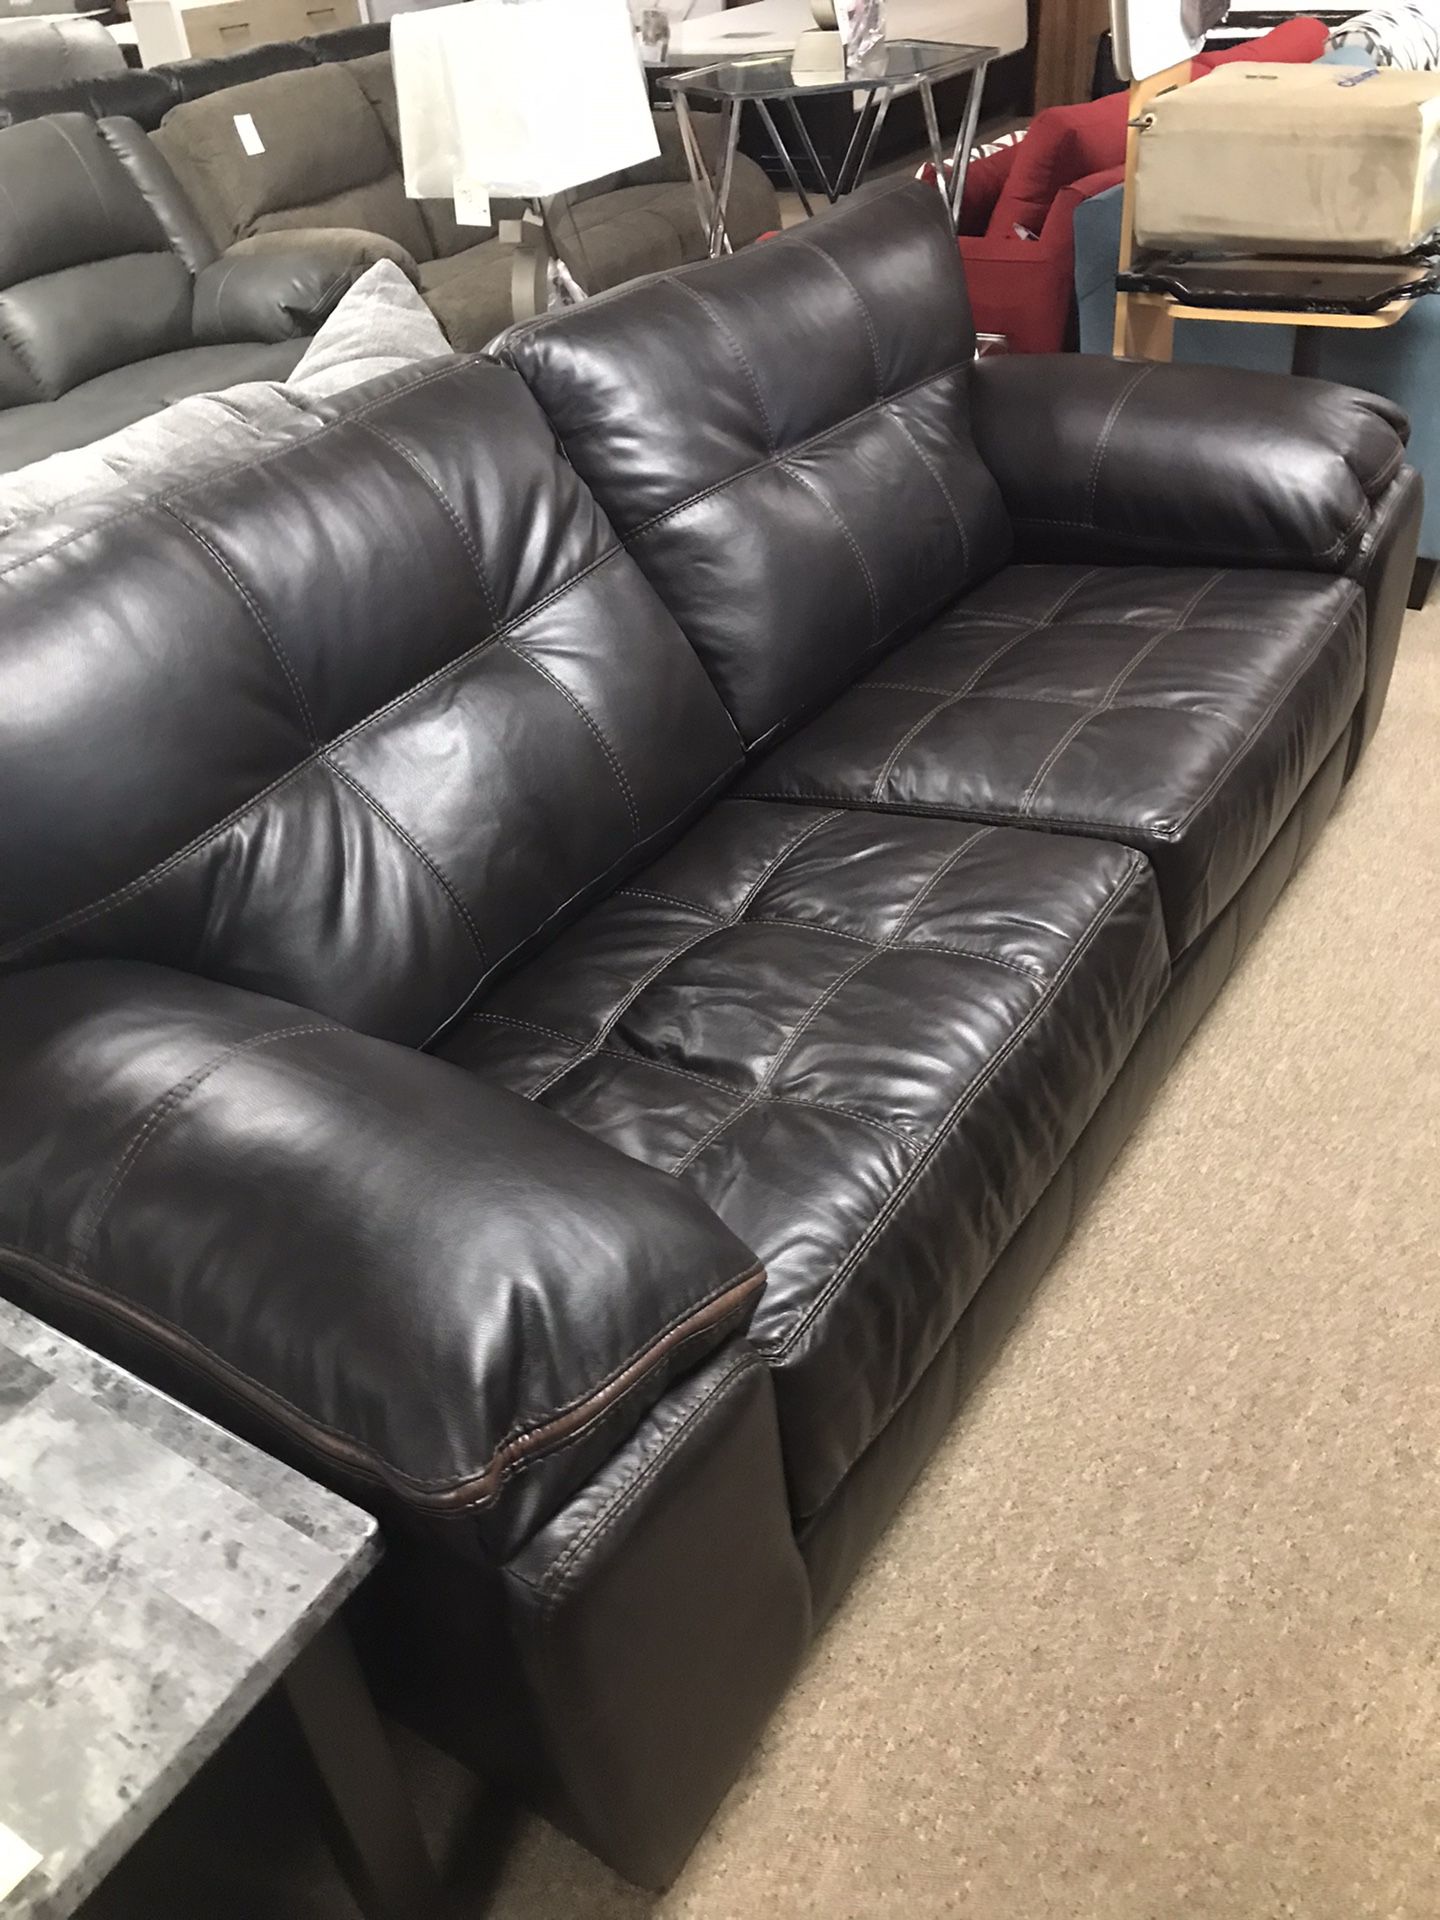 Super Comfy Plush Couch And Sectional 